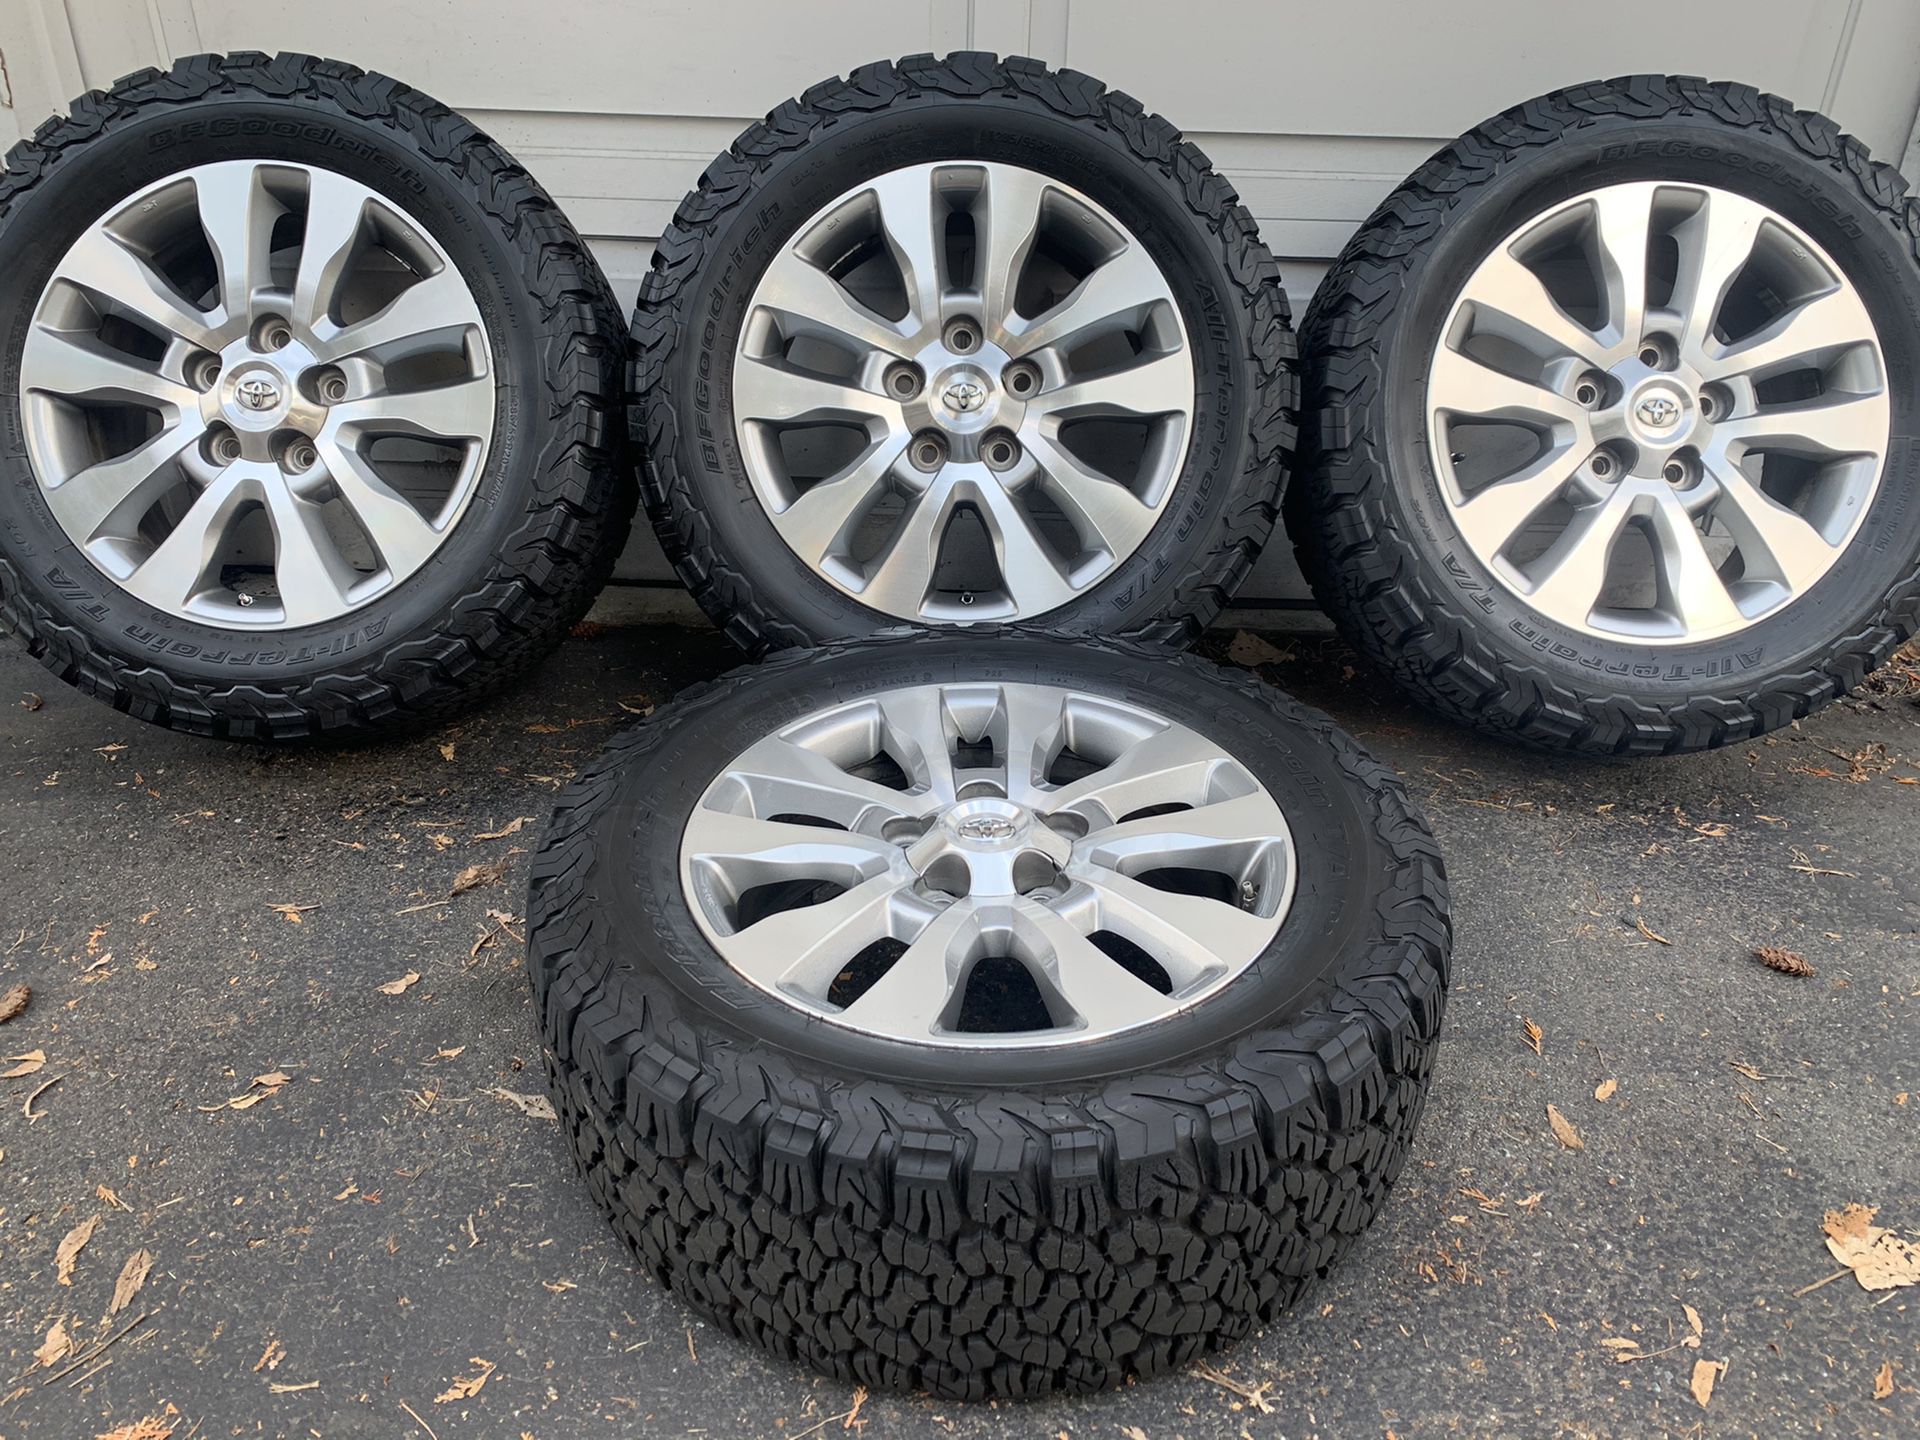 Toyota rims paired with Ko2 tires